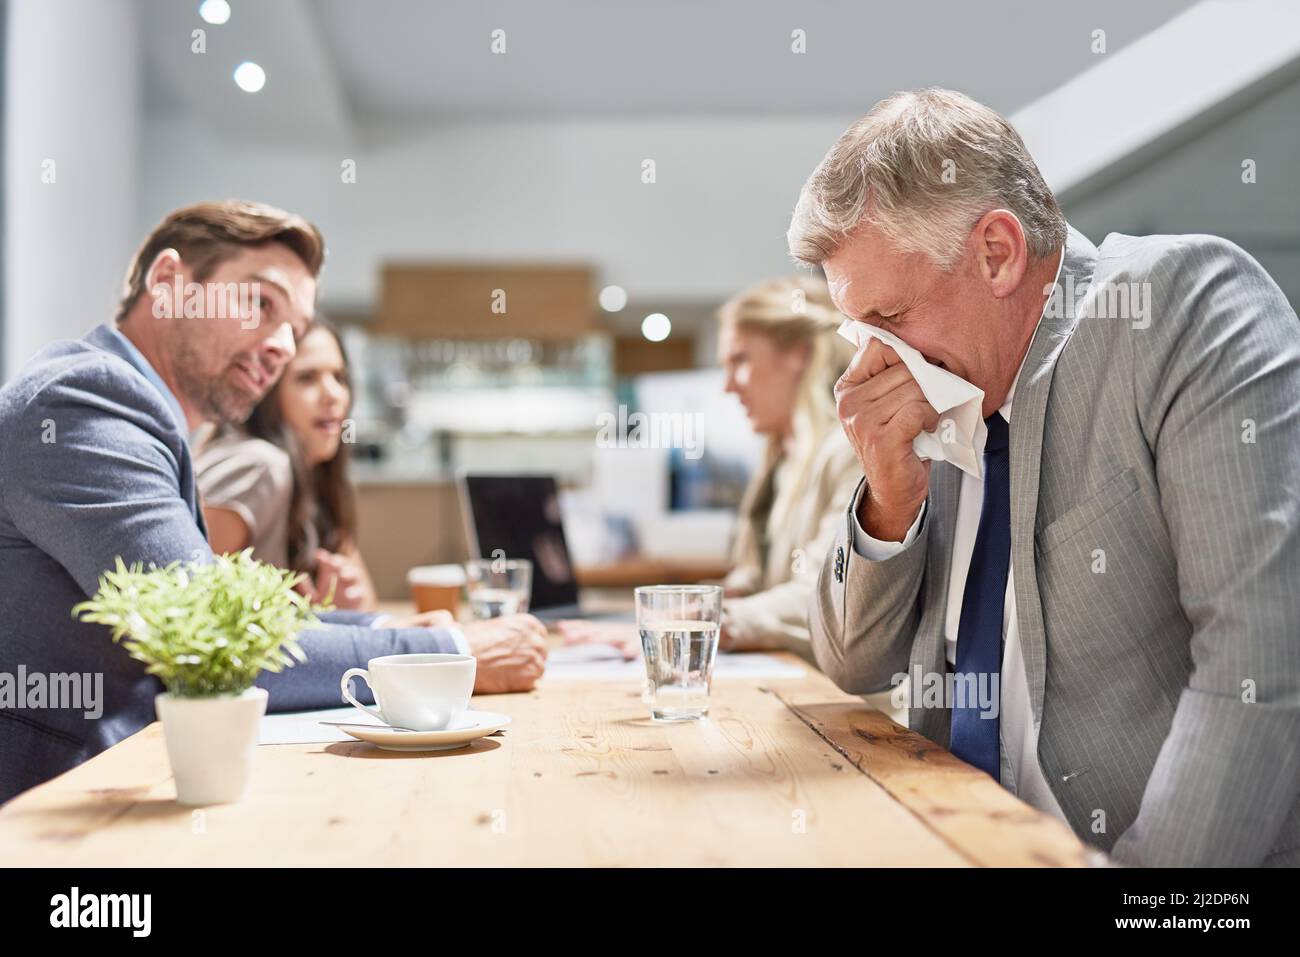 His allergies are drawing unwanted attention. Cropped shot of a businessman blowing his nose while his colleagues look on in disgust. Stock Photo